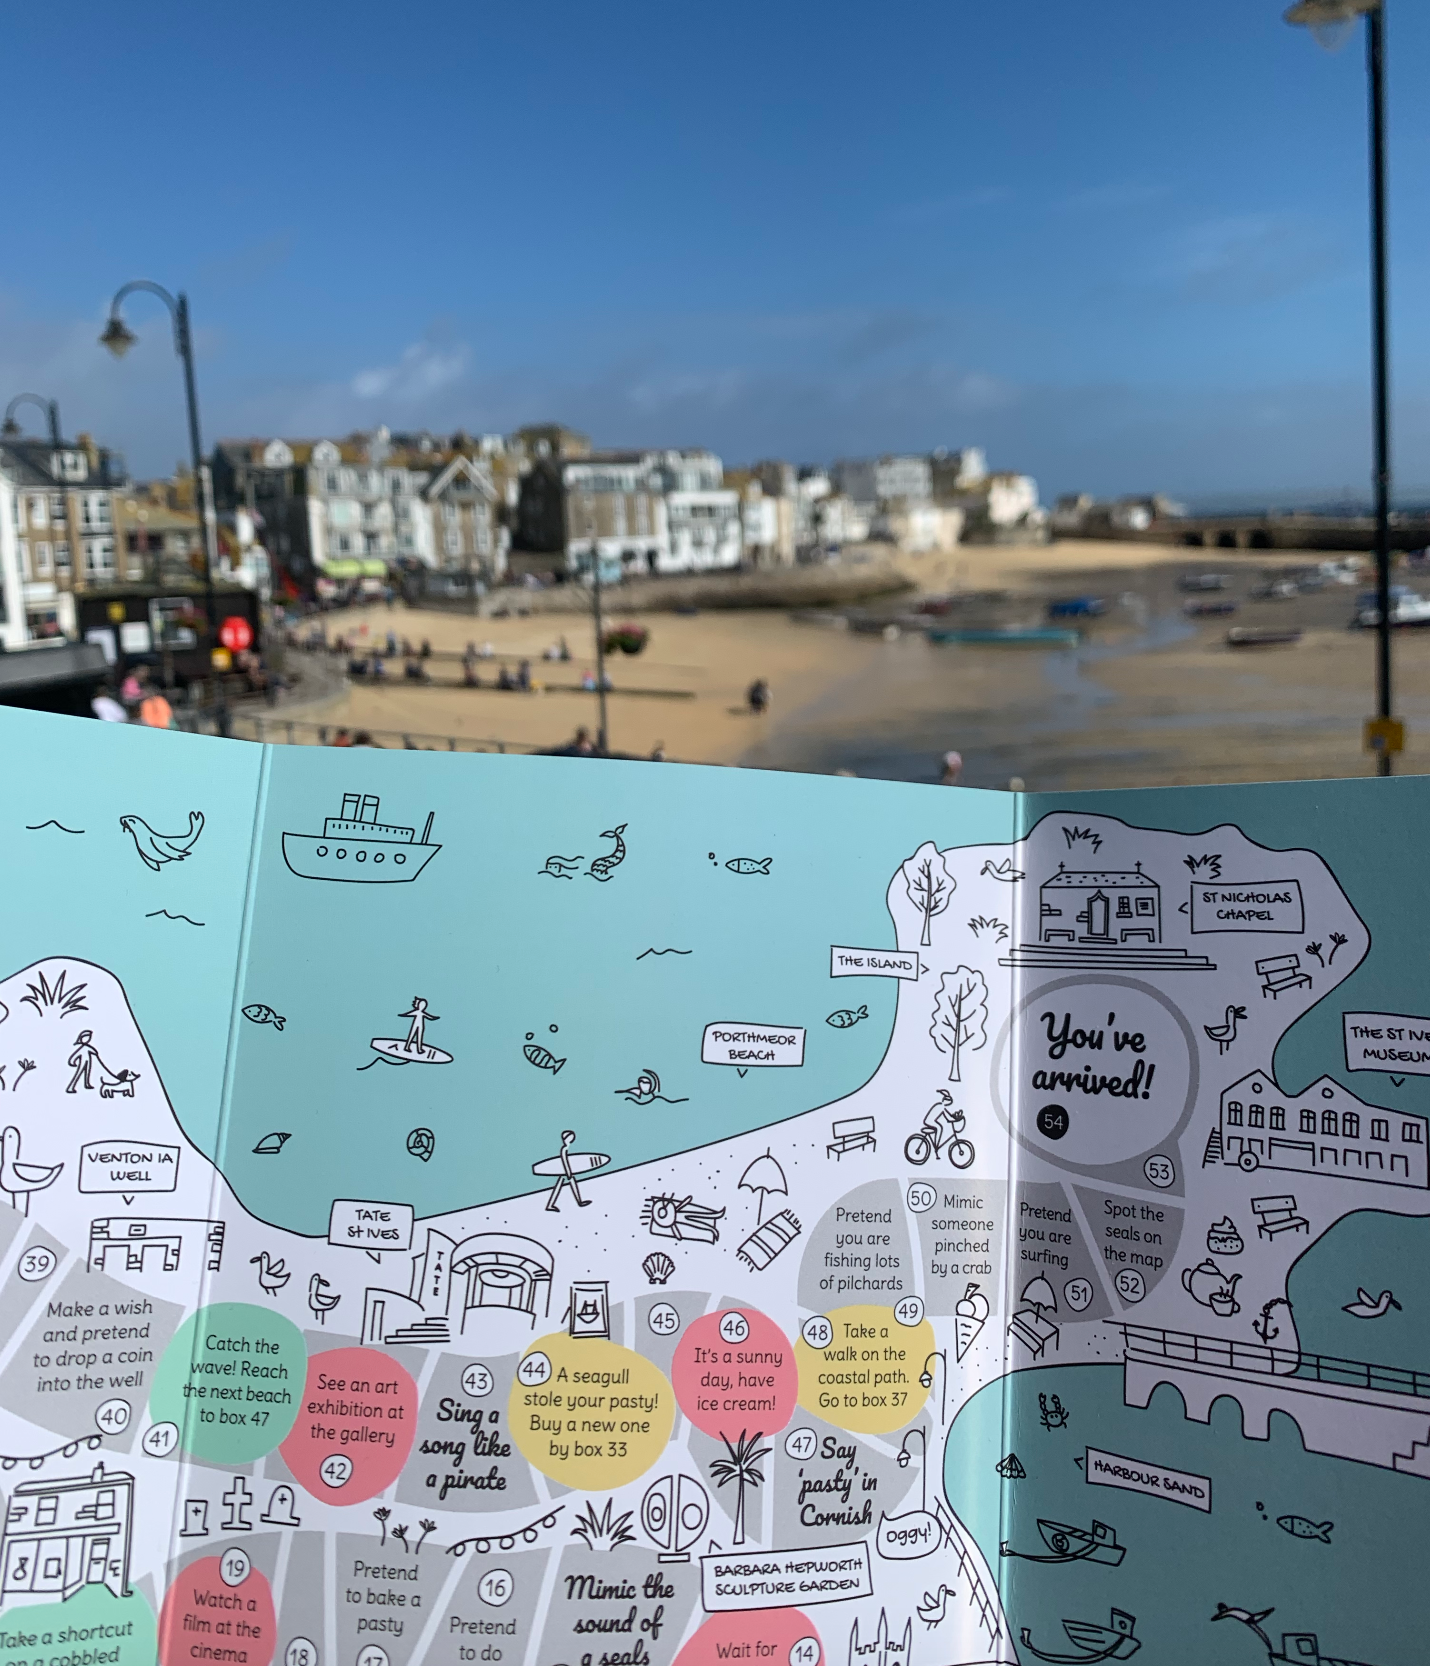 Cornish board game based on the map of St Ives with St Ives bay and town in the background.